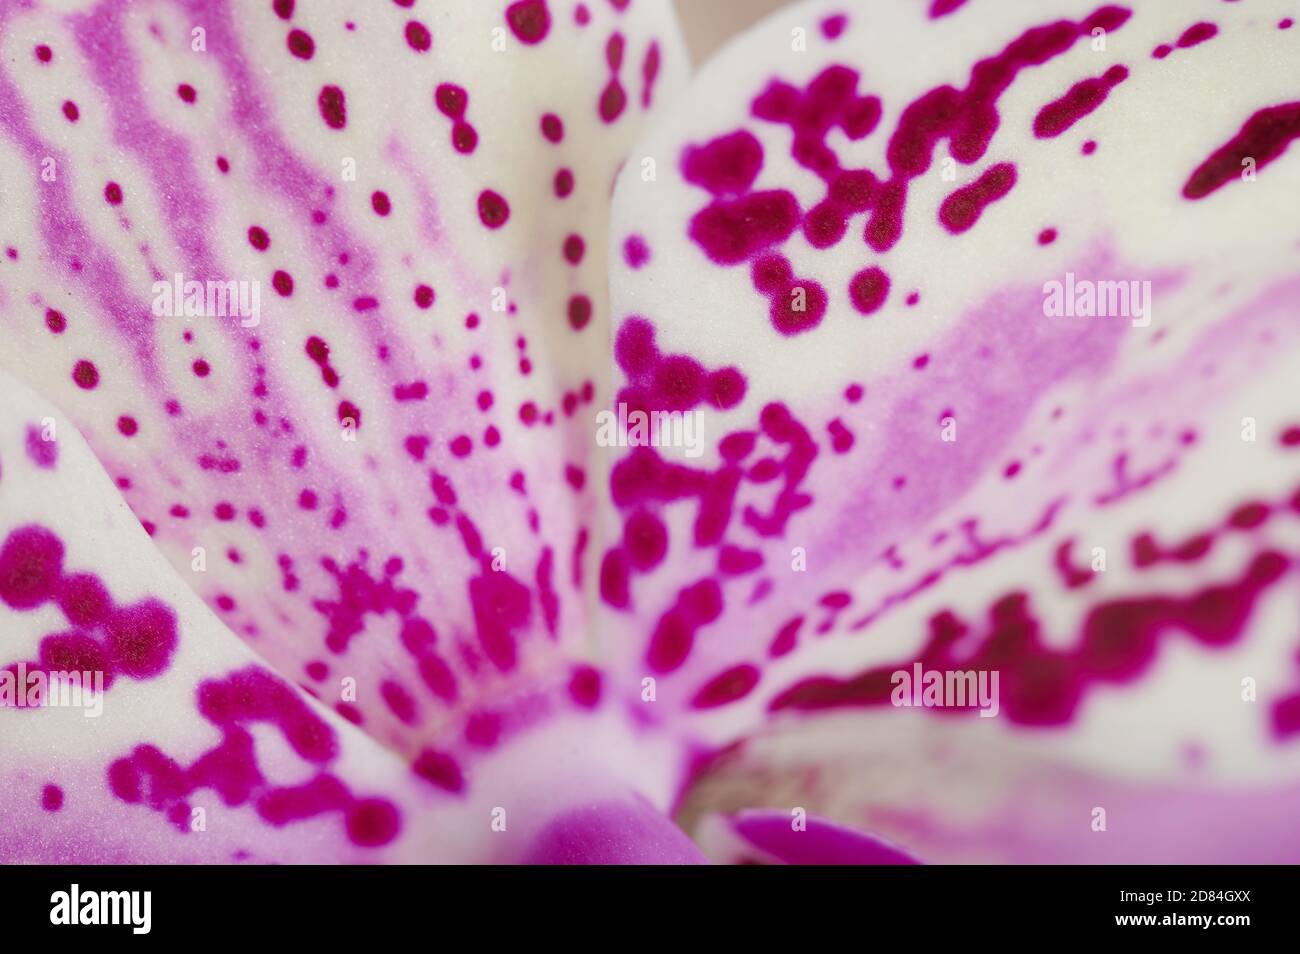 Pink flower leaf background macro close up view Stock Photo